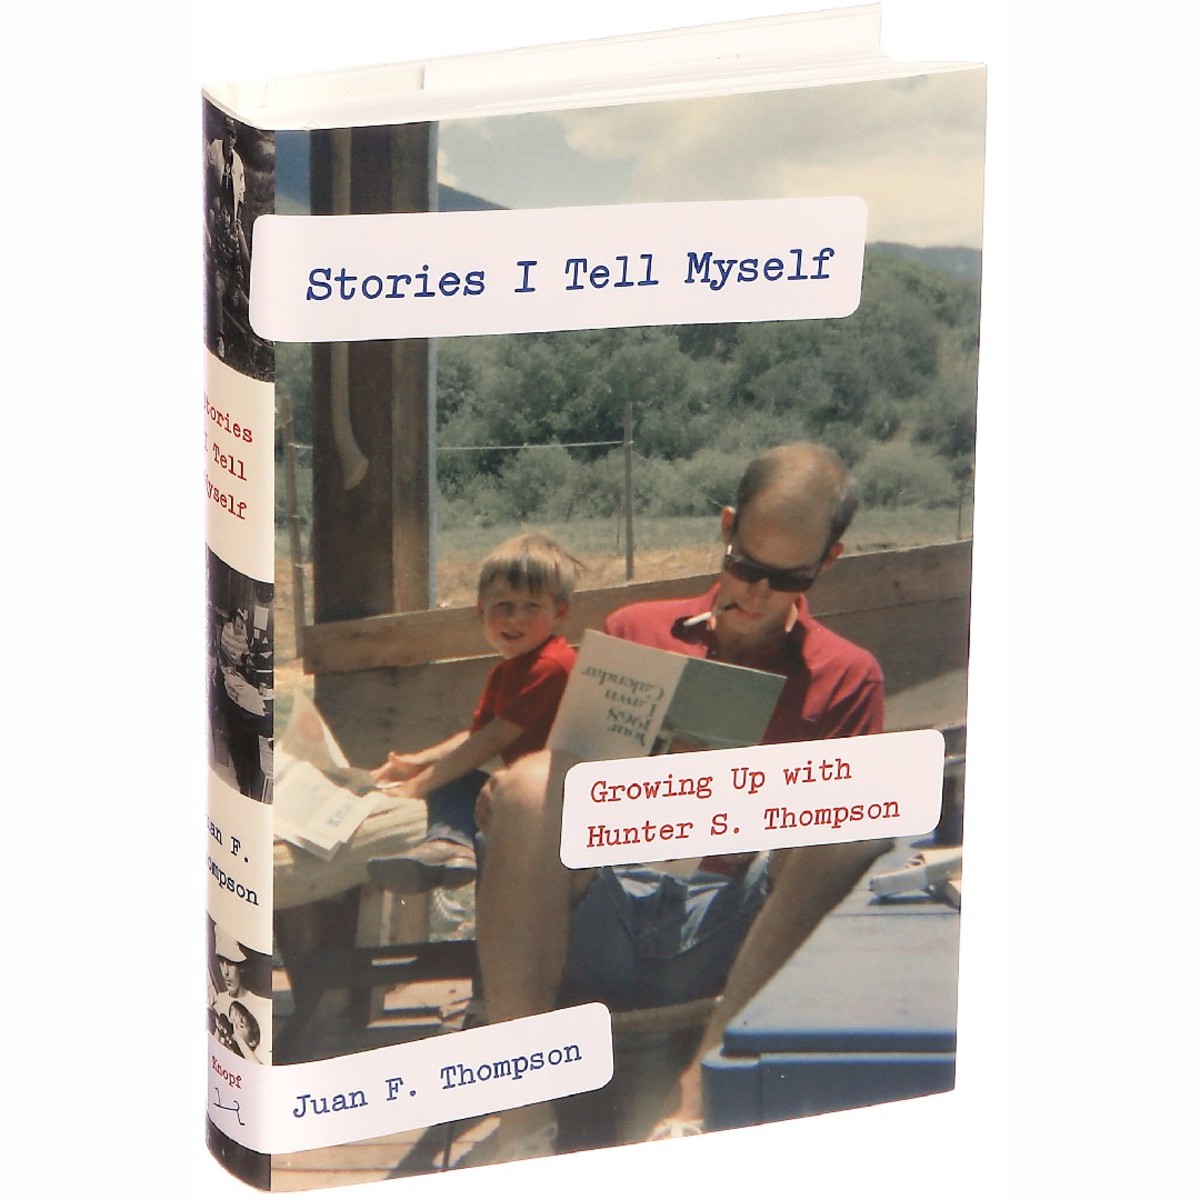 'Stories I Tell Myself: Growing Up with Hunter S. Thompson' by Juan F. Thompson